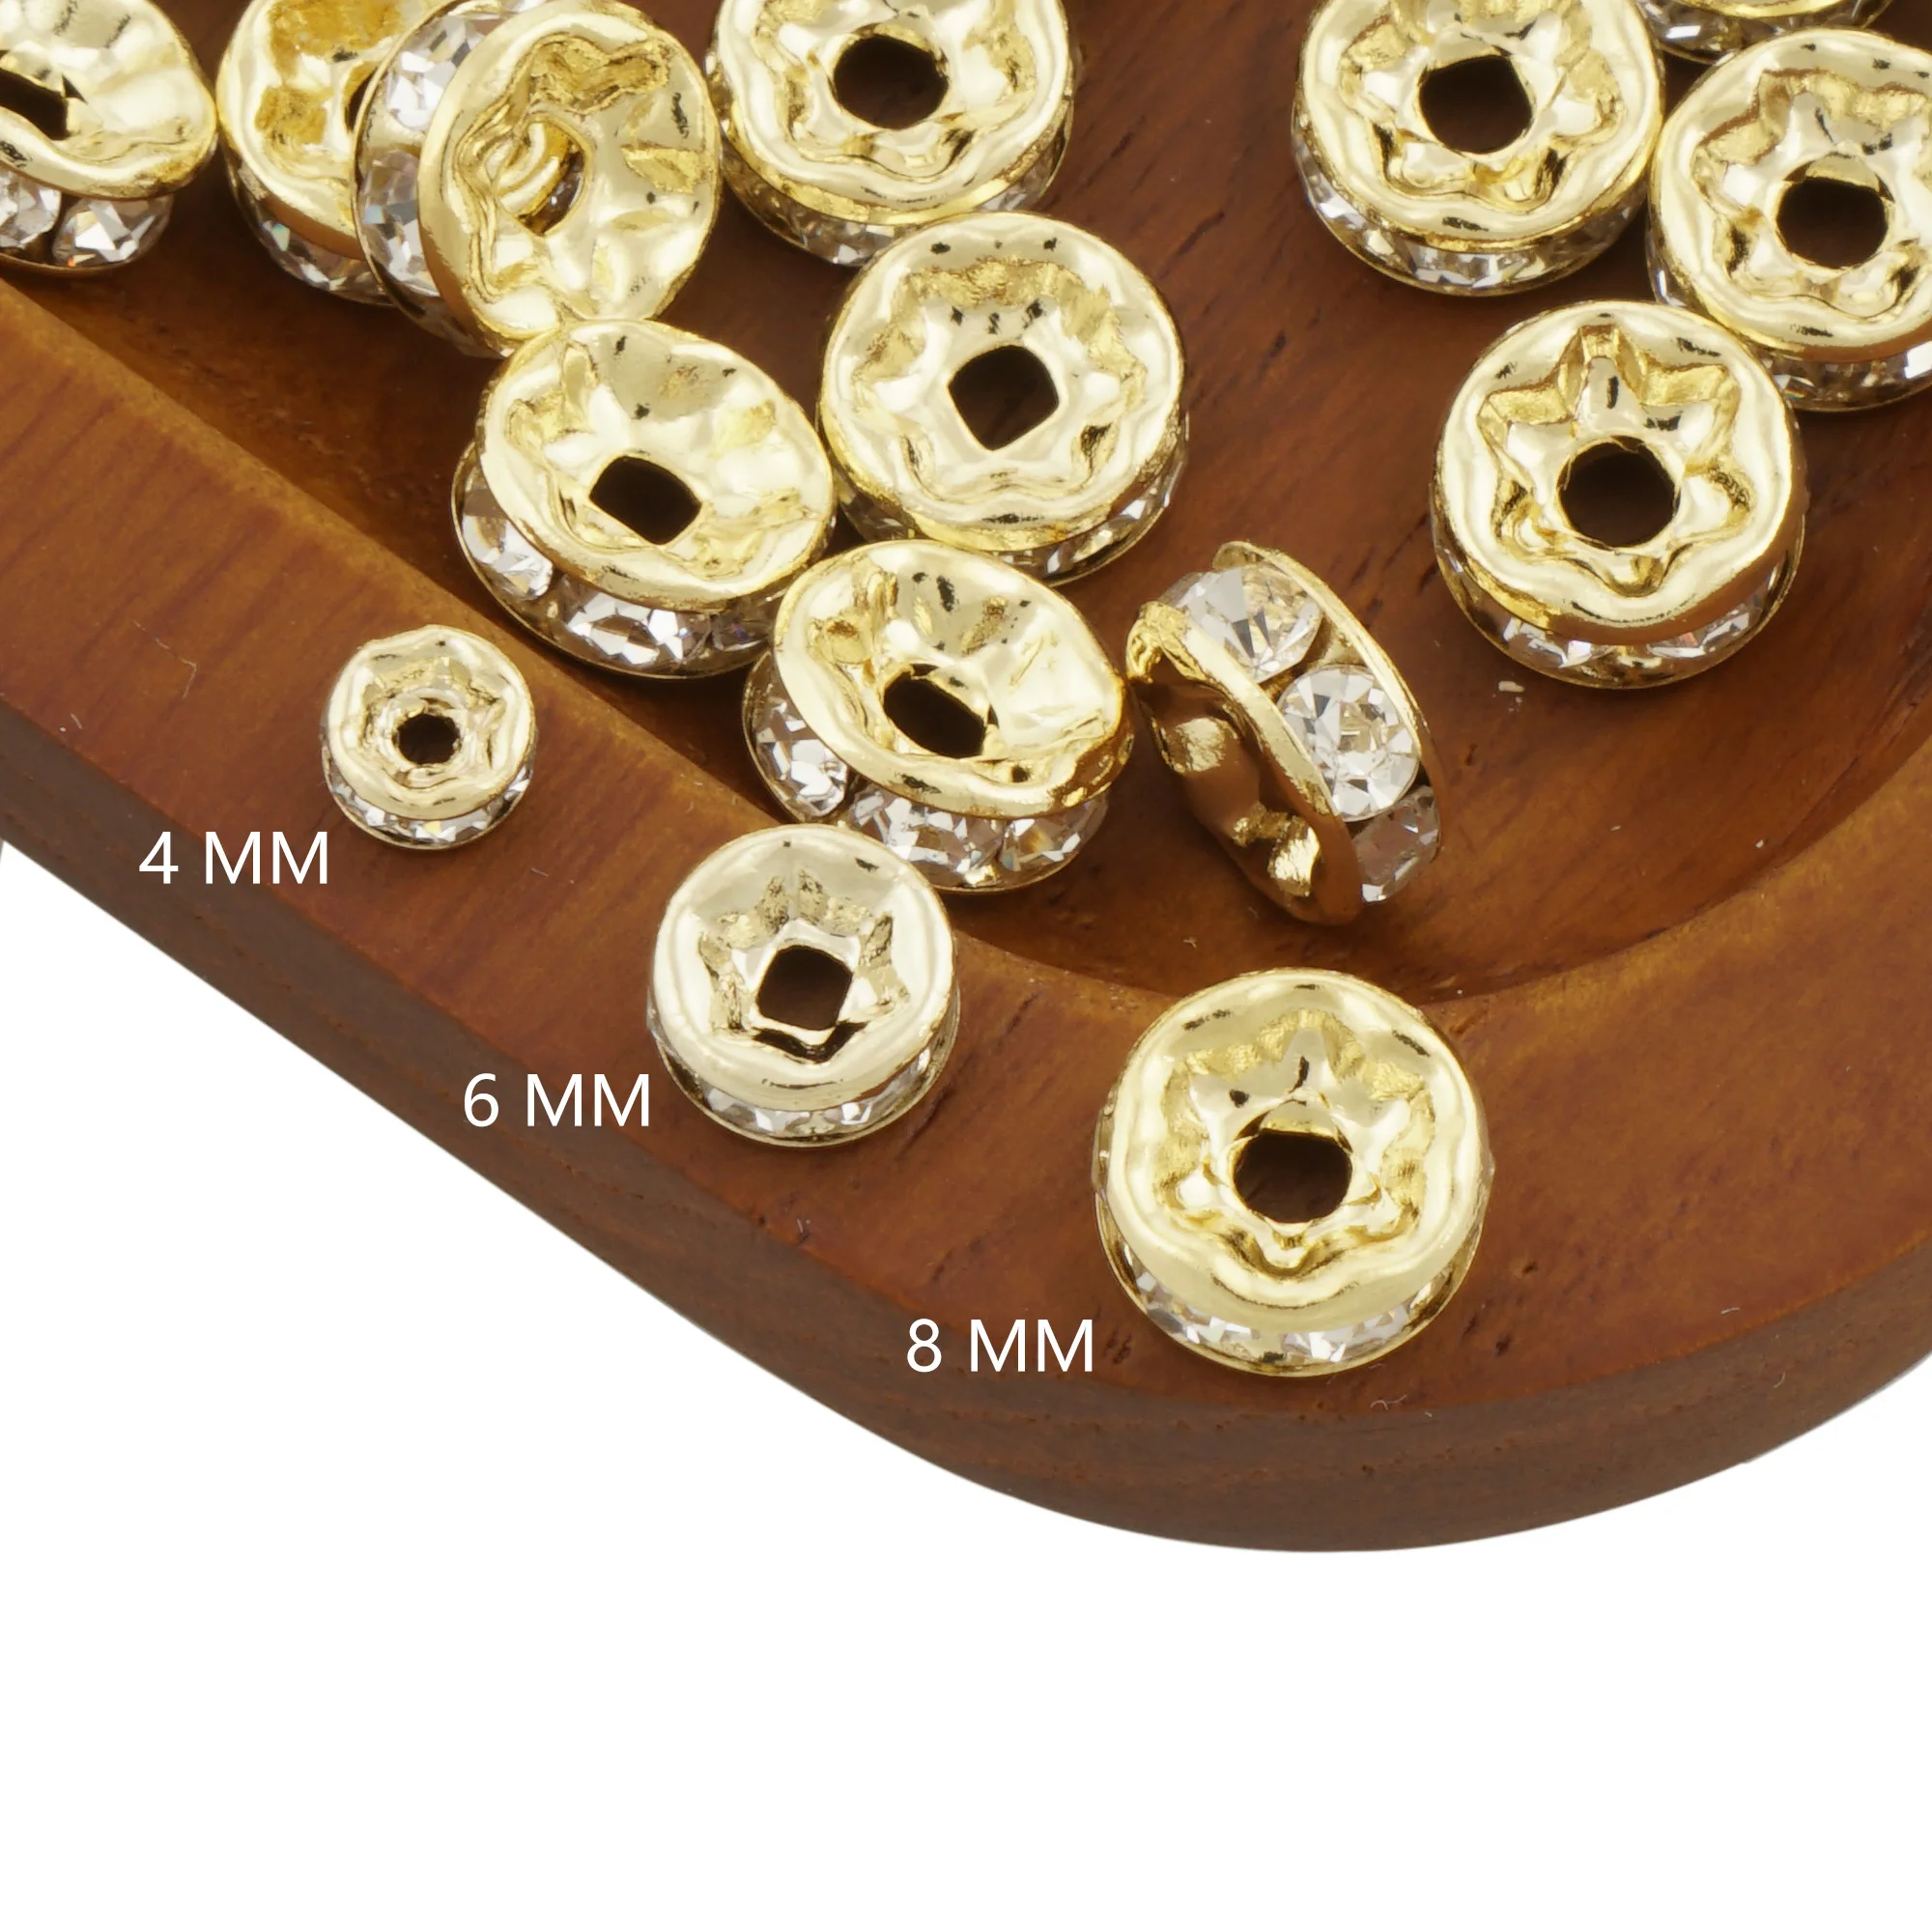 

50pcs Gold Filled Rondelle Spacer Beads with Clear Crystal Rhinestones,Sparkle Beads In 4mm, 6mm, 8mm, Jewelry Component